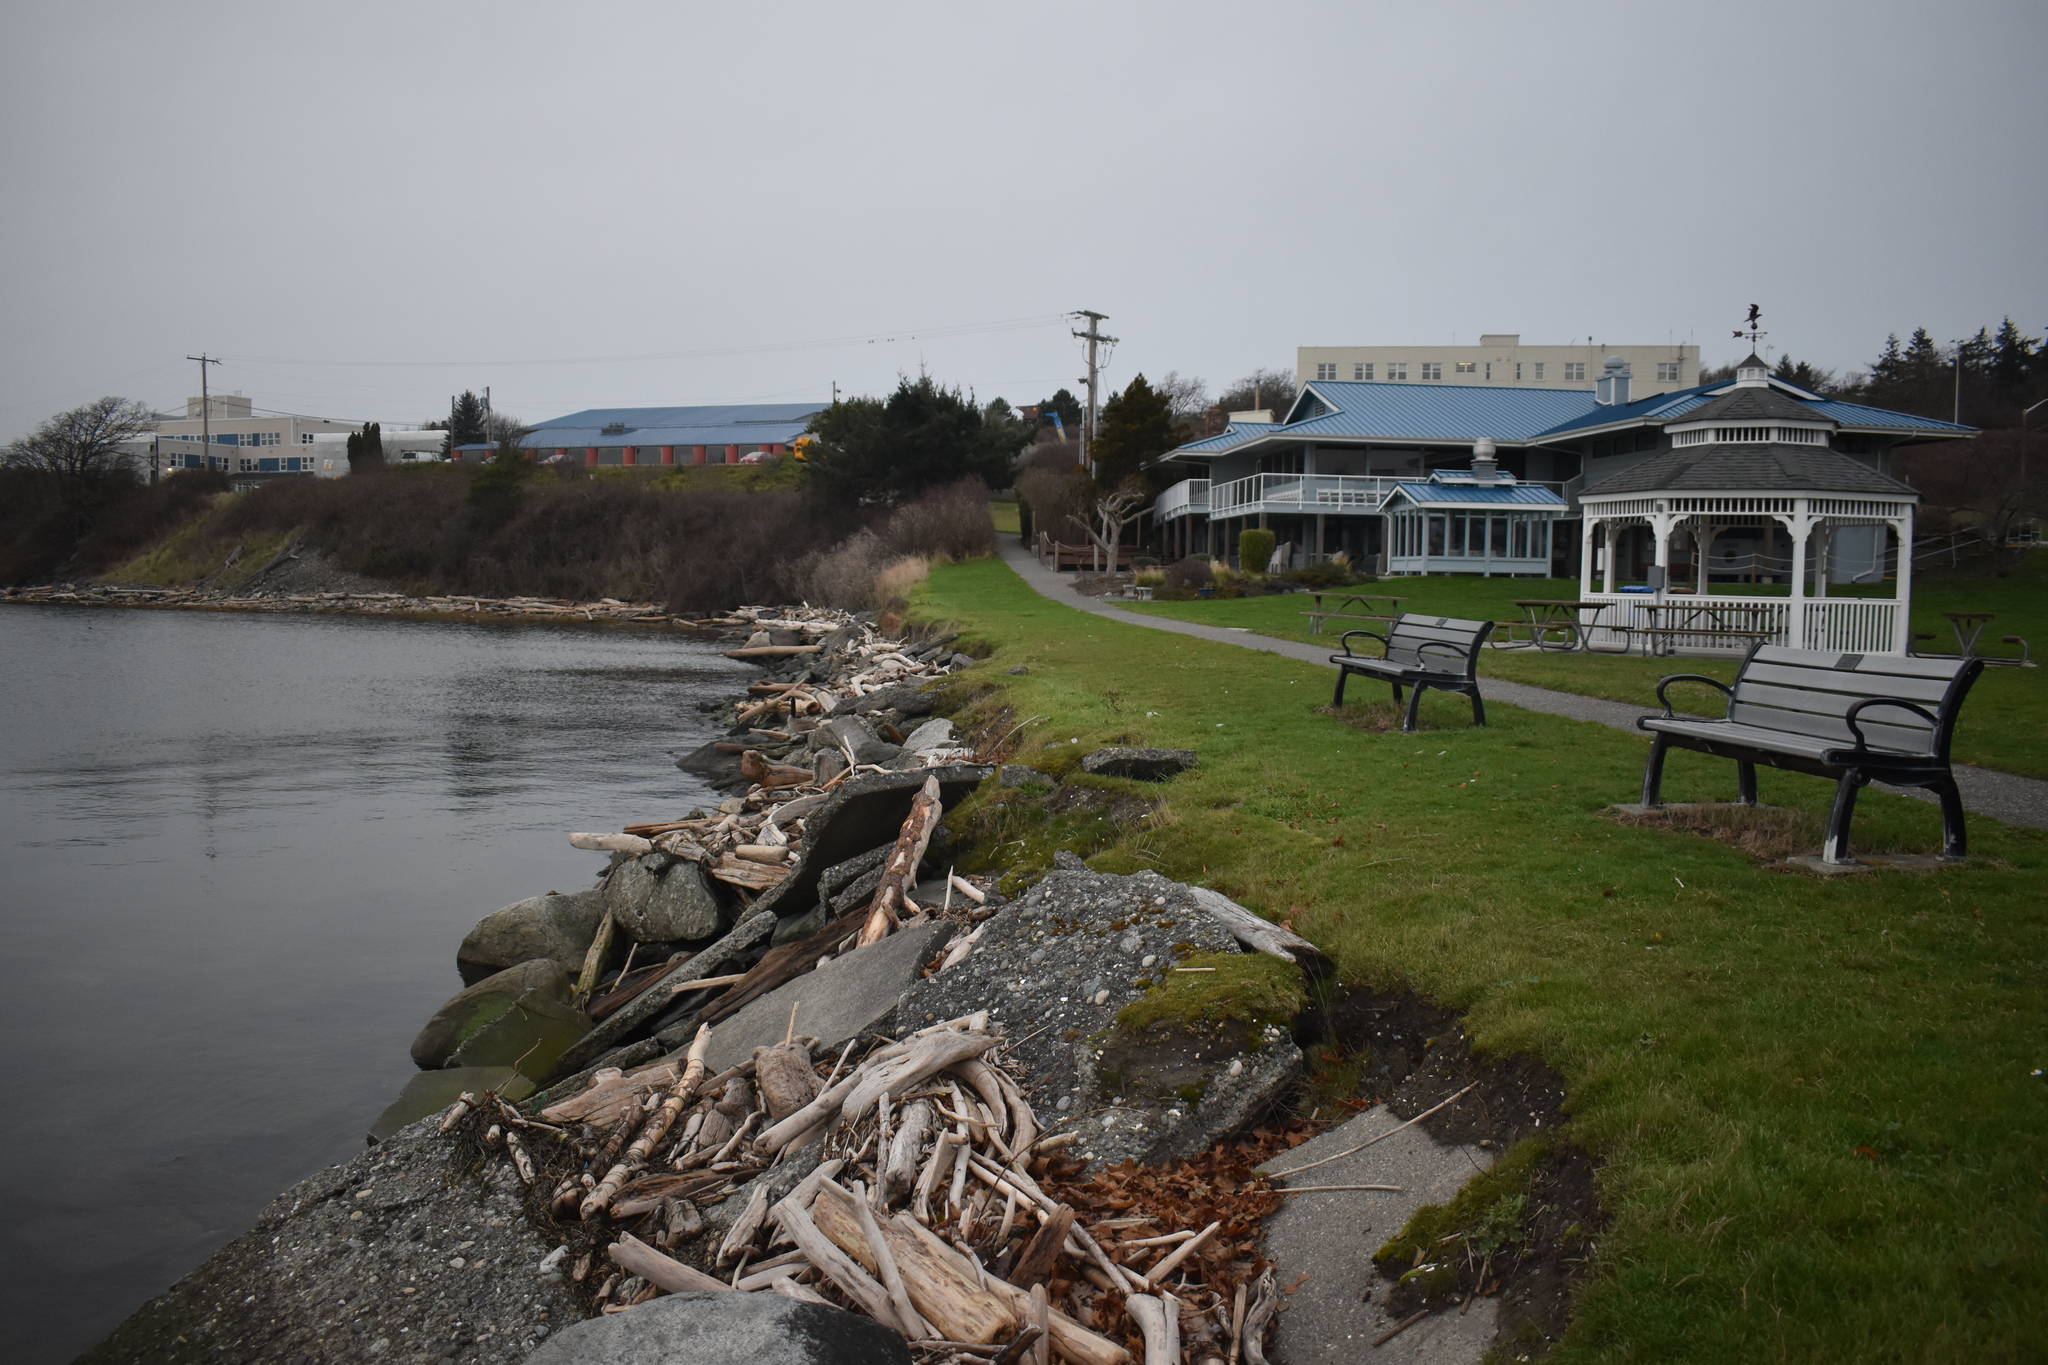 One of the shoreline restoration plans includes a pocket beach at Catalina Park in Oak Harbor, and the gazebo would need to be relocated. Photo by Emily Gilbert/Whidbey News-Times